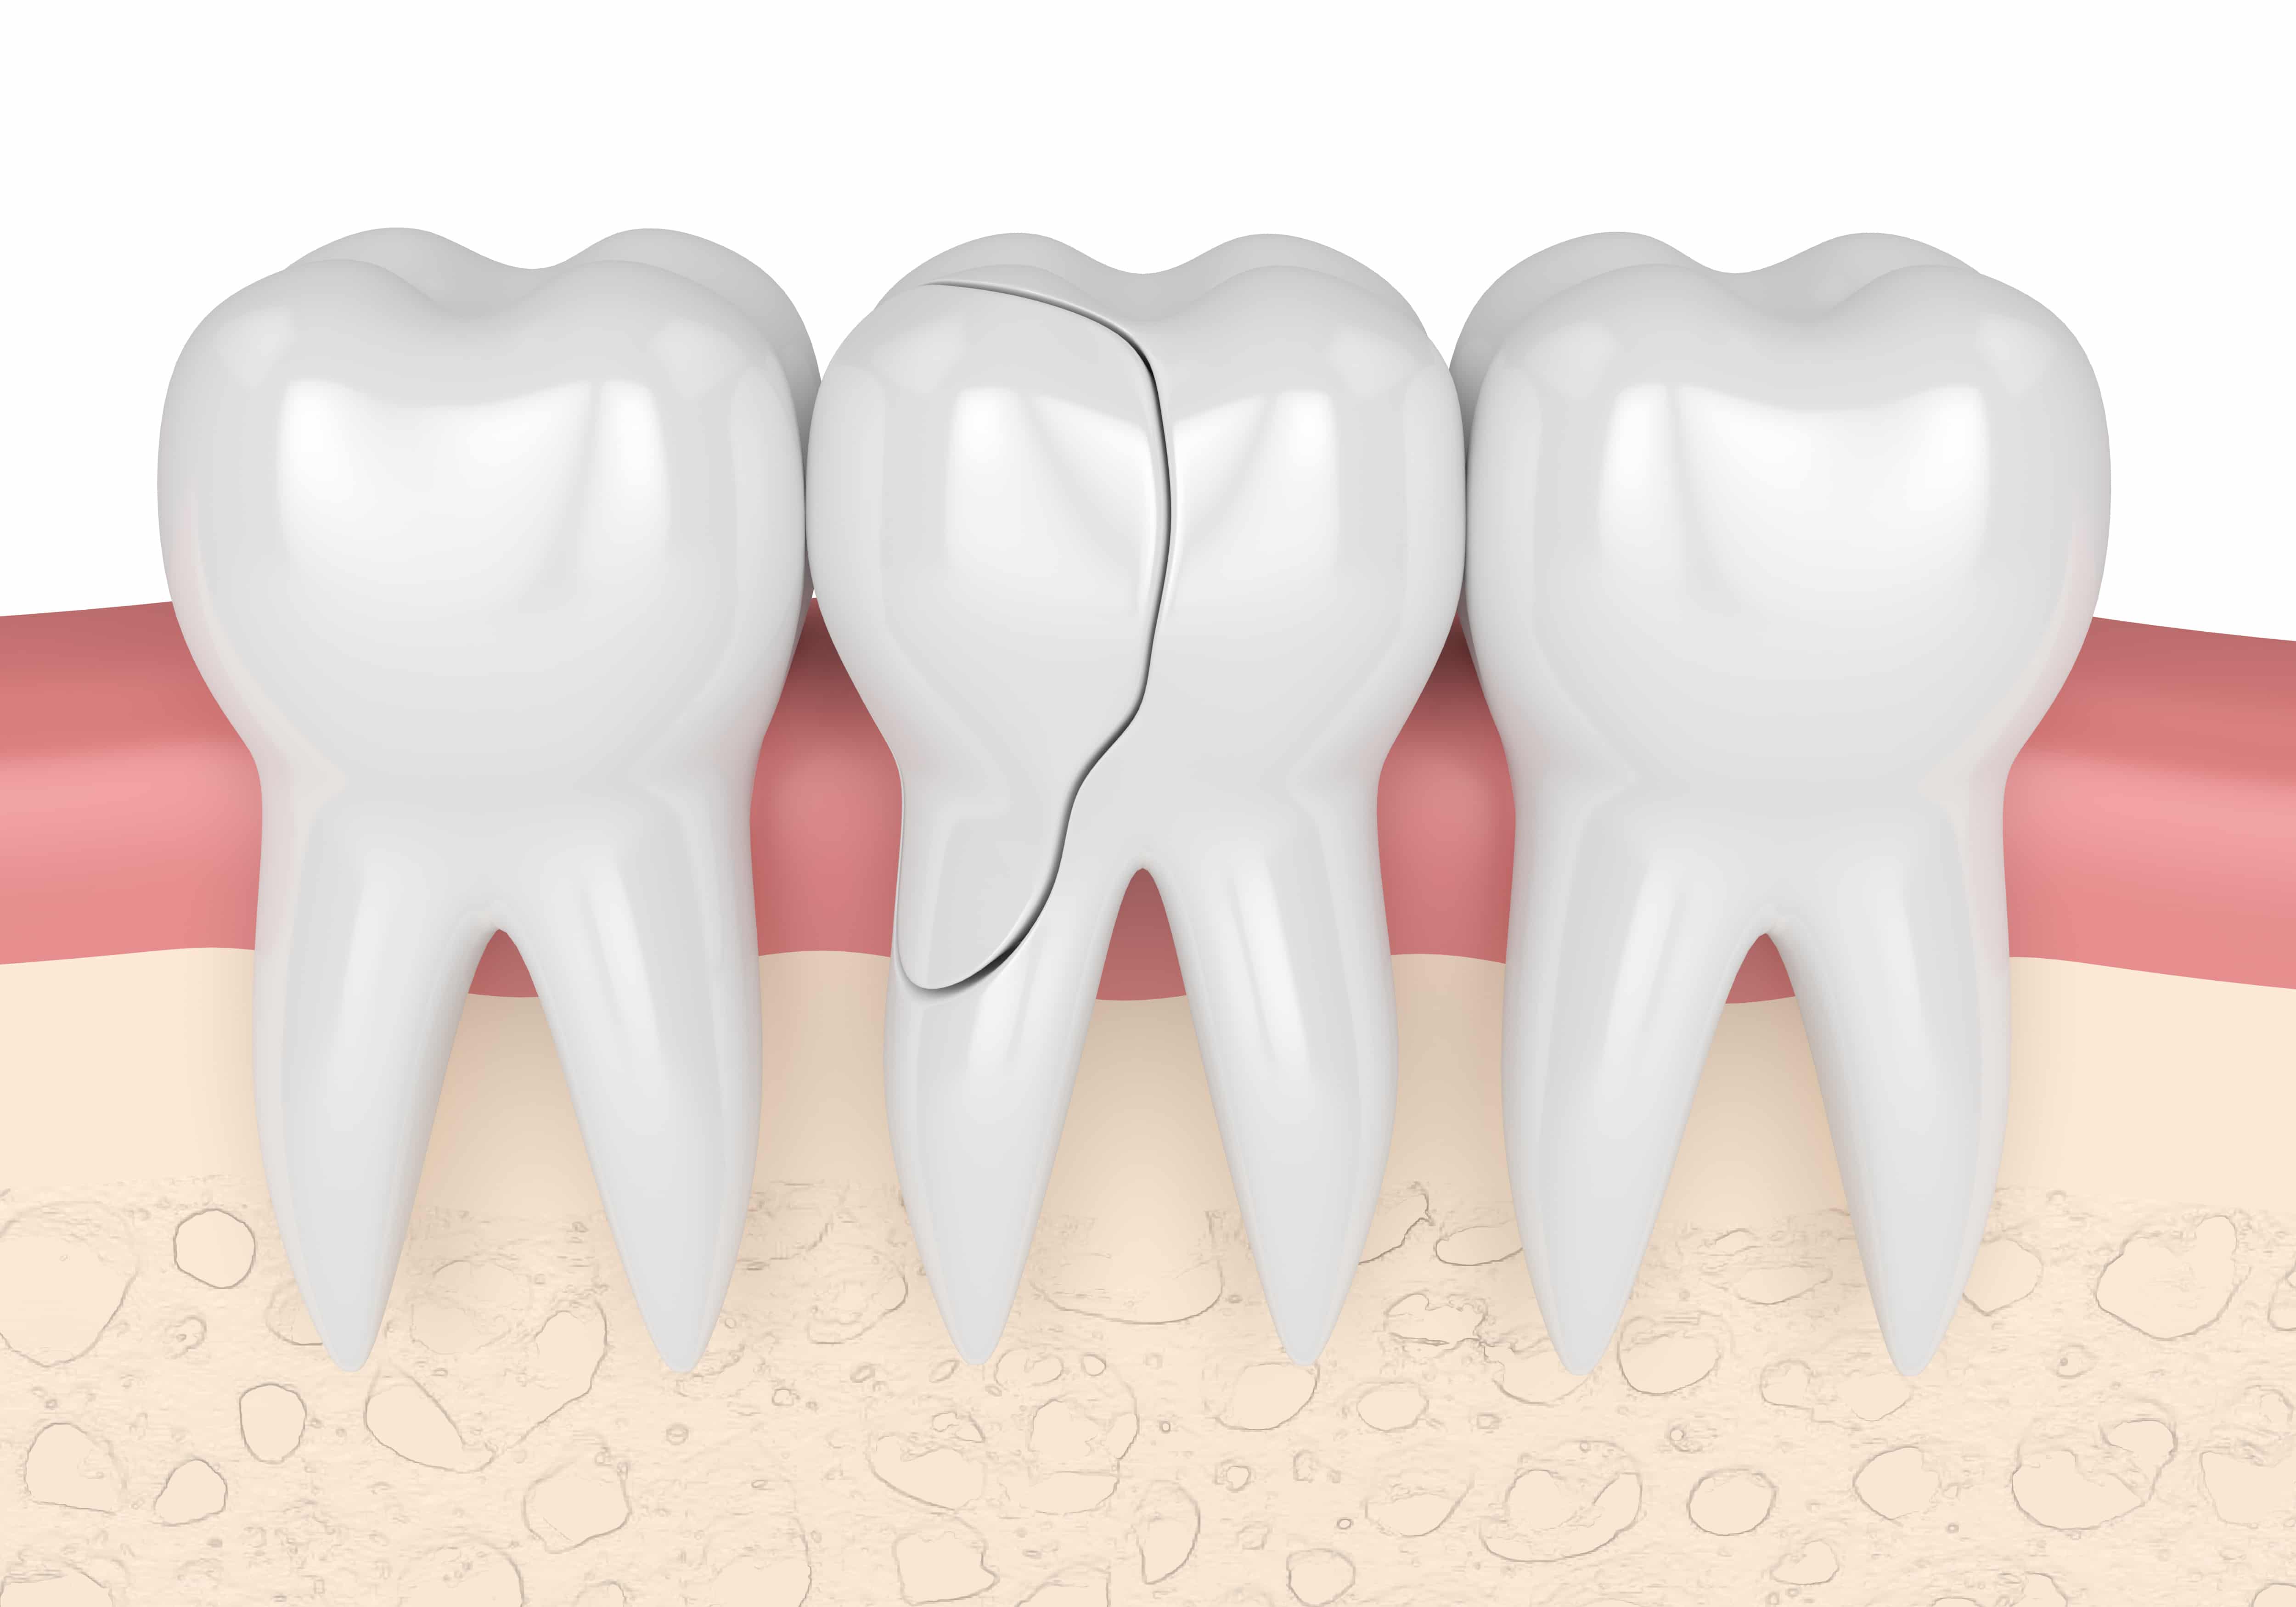 What To Do If You Crack Chip Or Break A Tooth - Radiance Dental